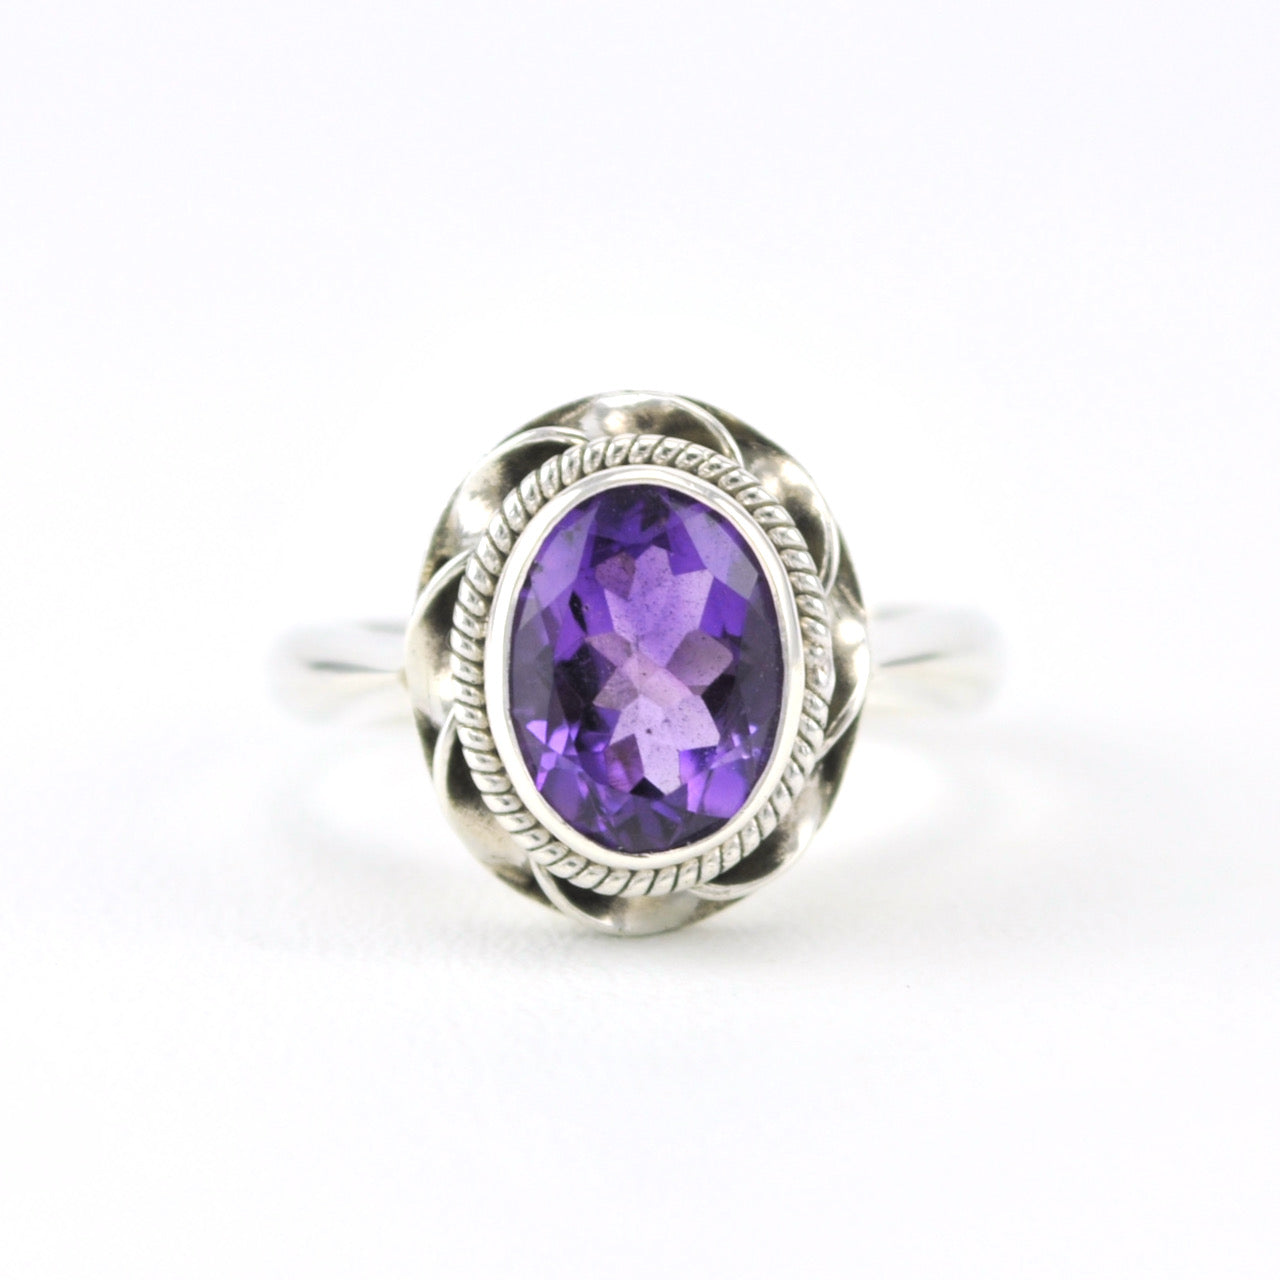 Silver Amethyst 7x9mm Oval Ring Size 6 1/2